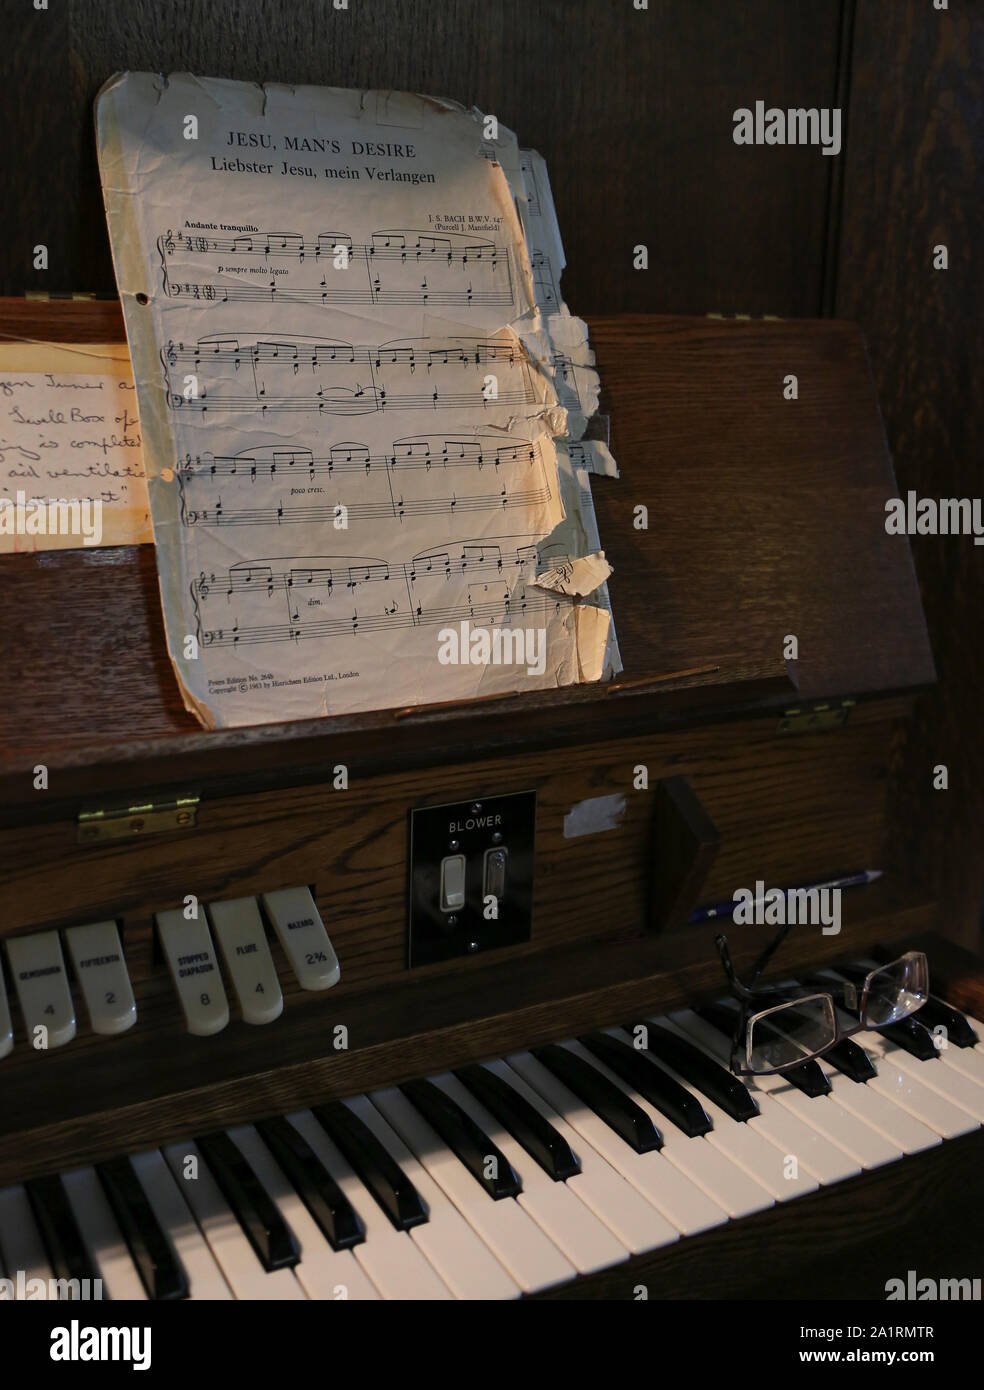 Ragged sheet music on church organ with spectacles on keyboard Stock Photo  - Alamy